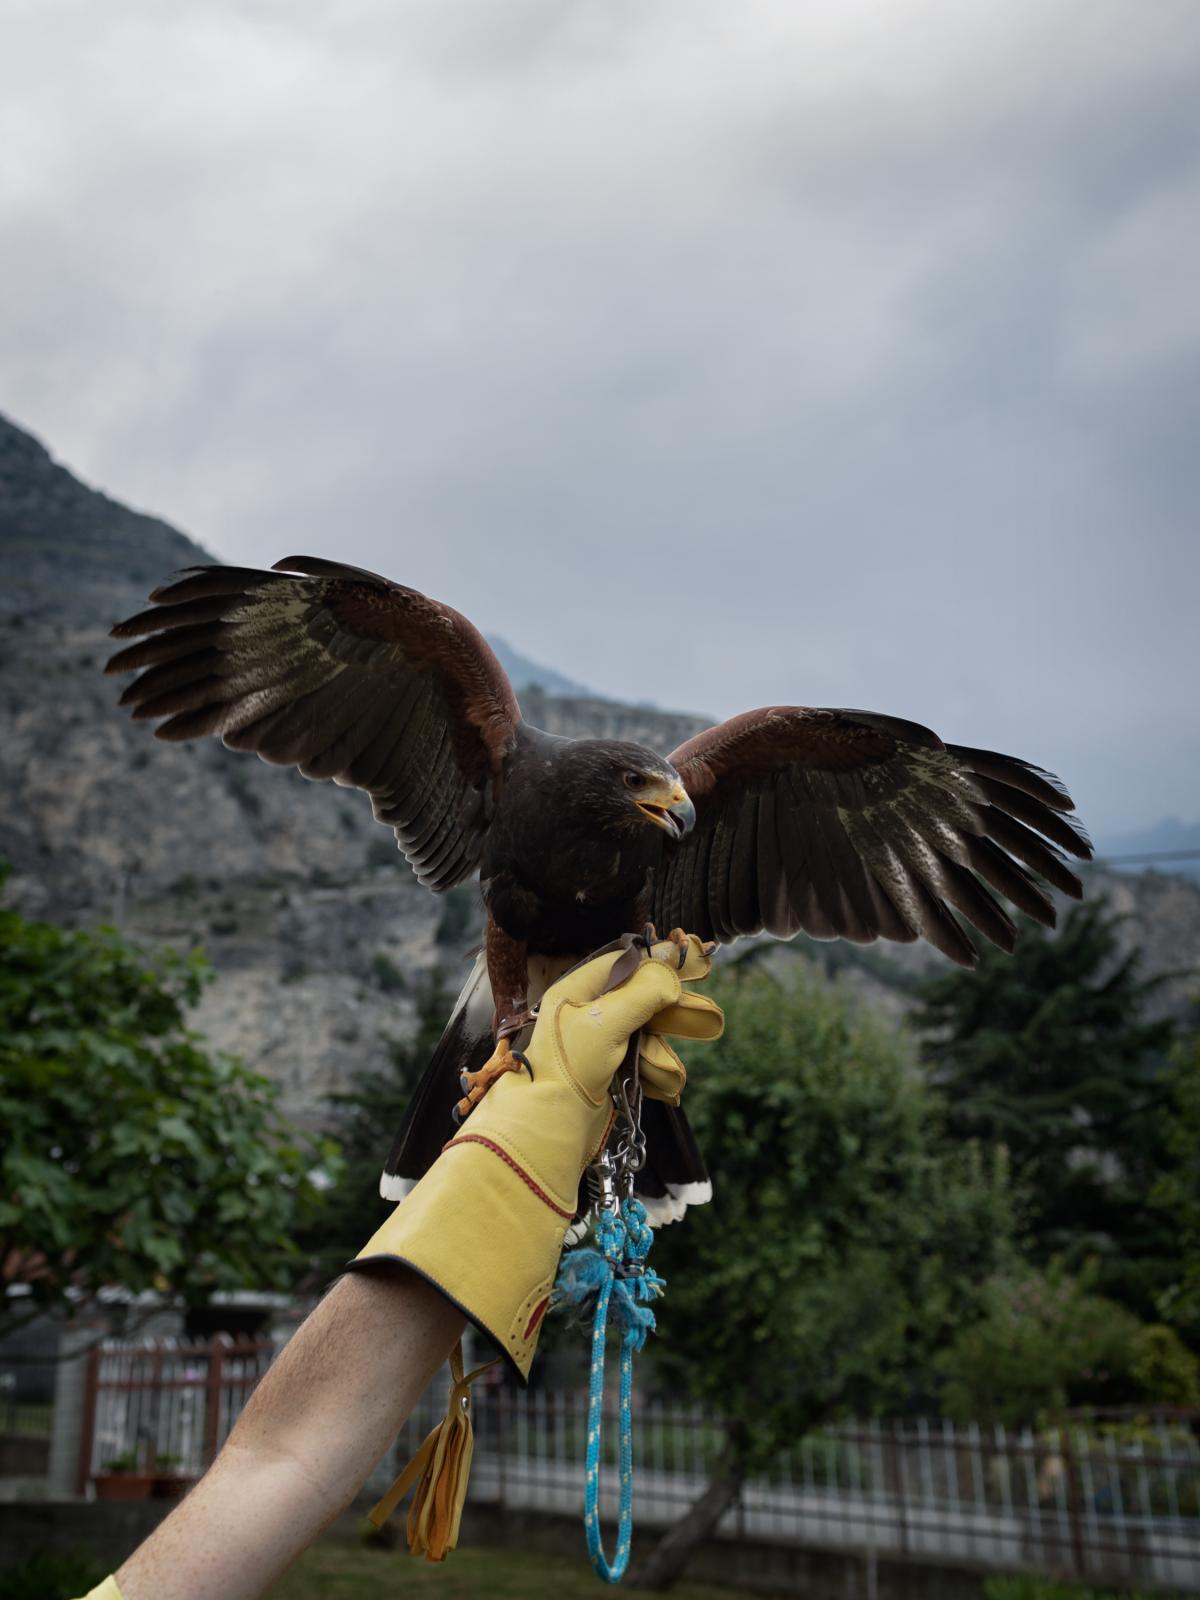 We are still dreaming - on going - A falconer holds a buzzard, a bird considered by the...